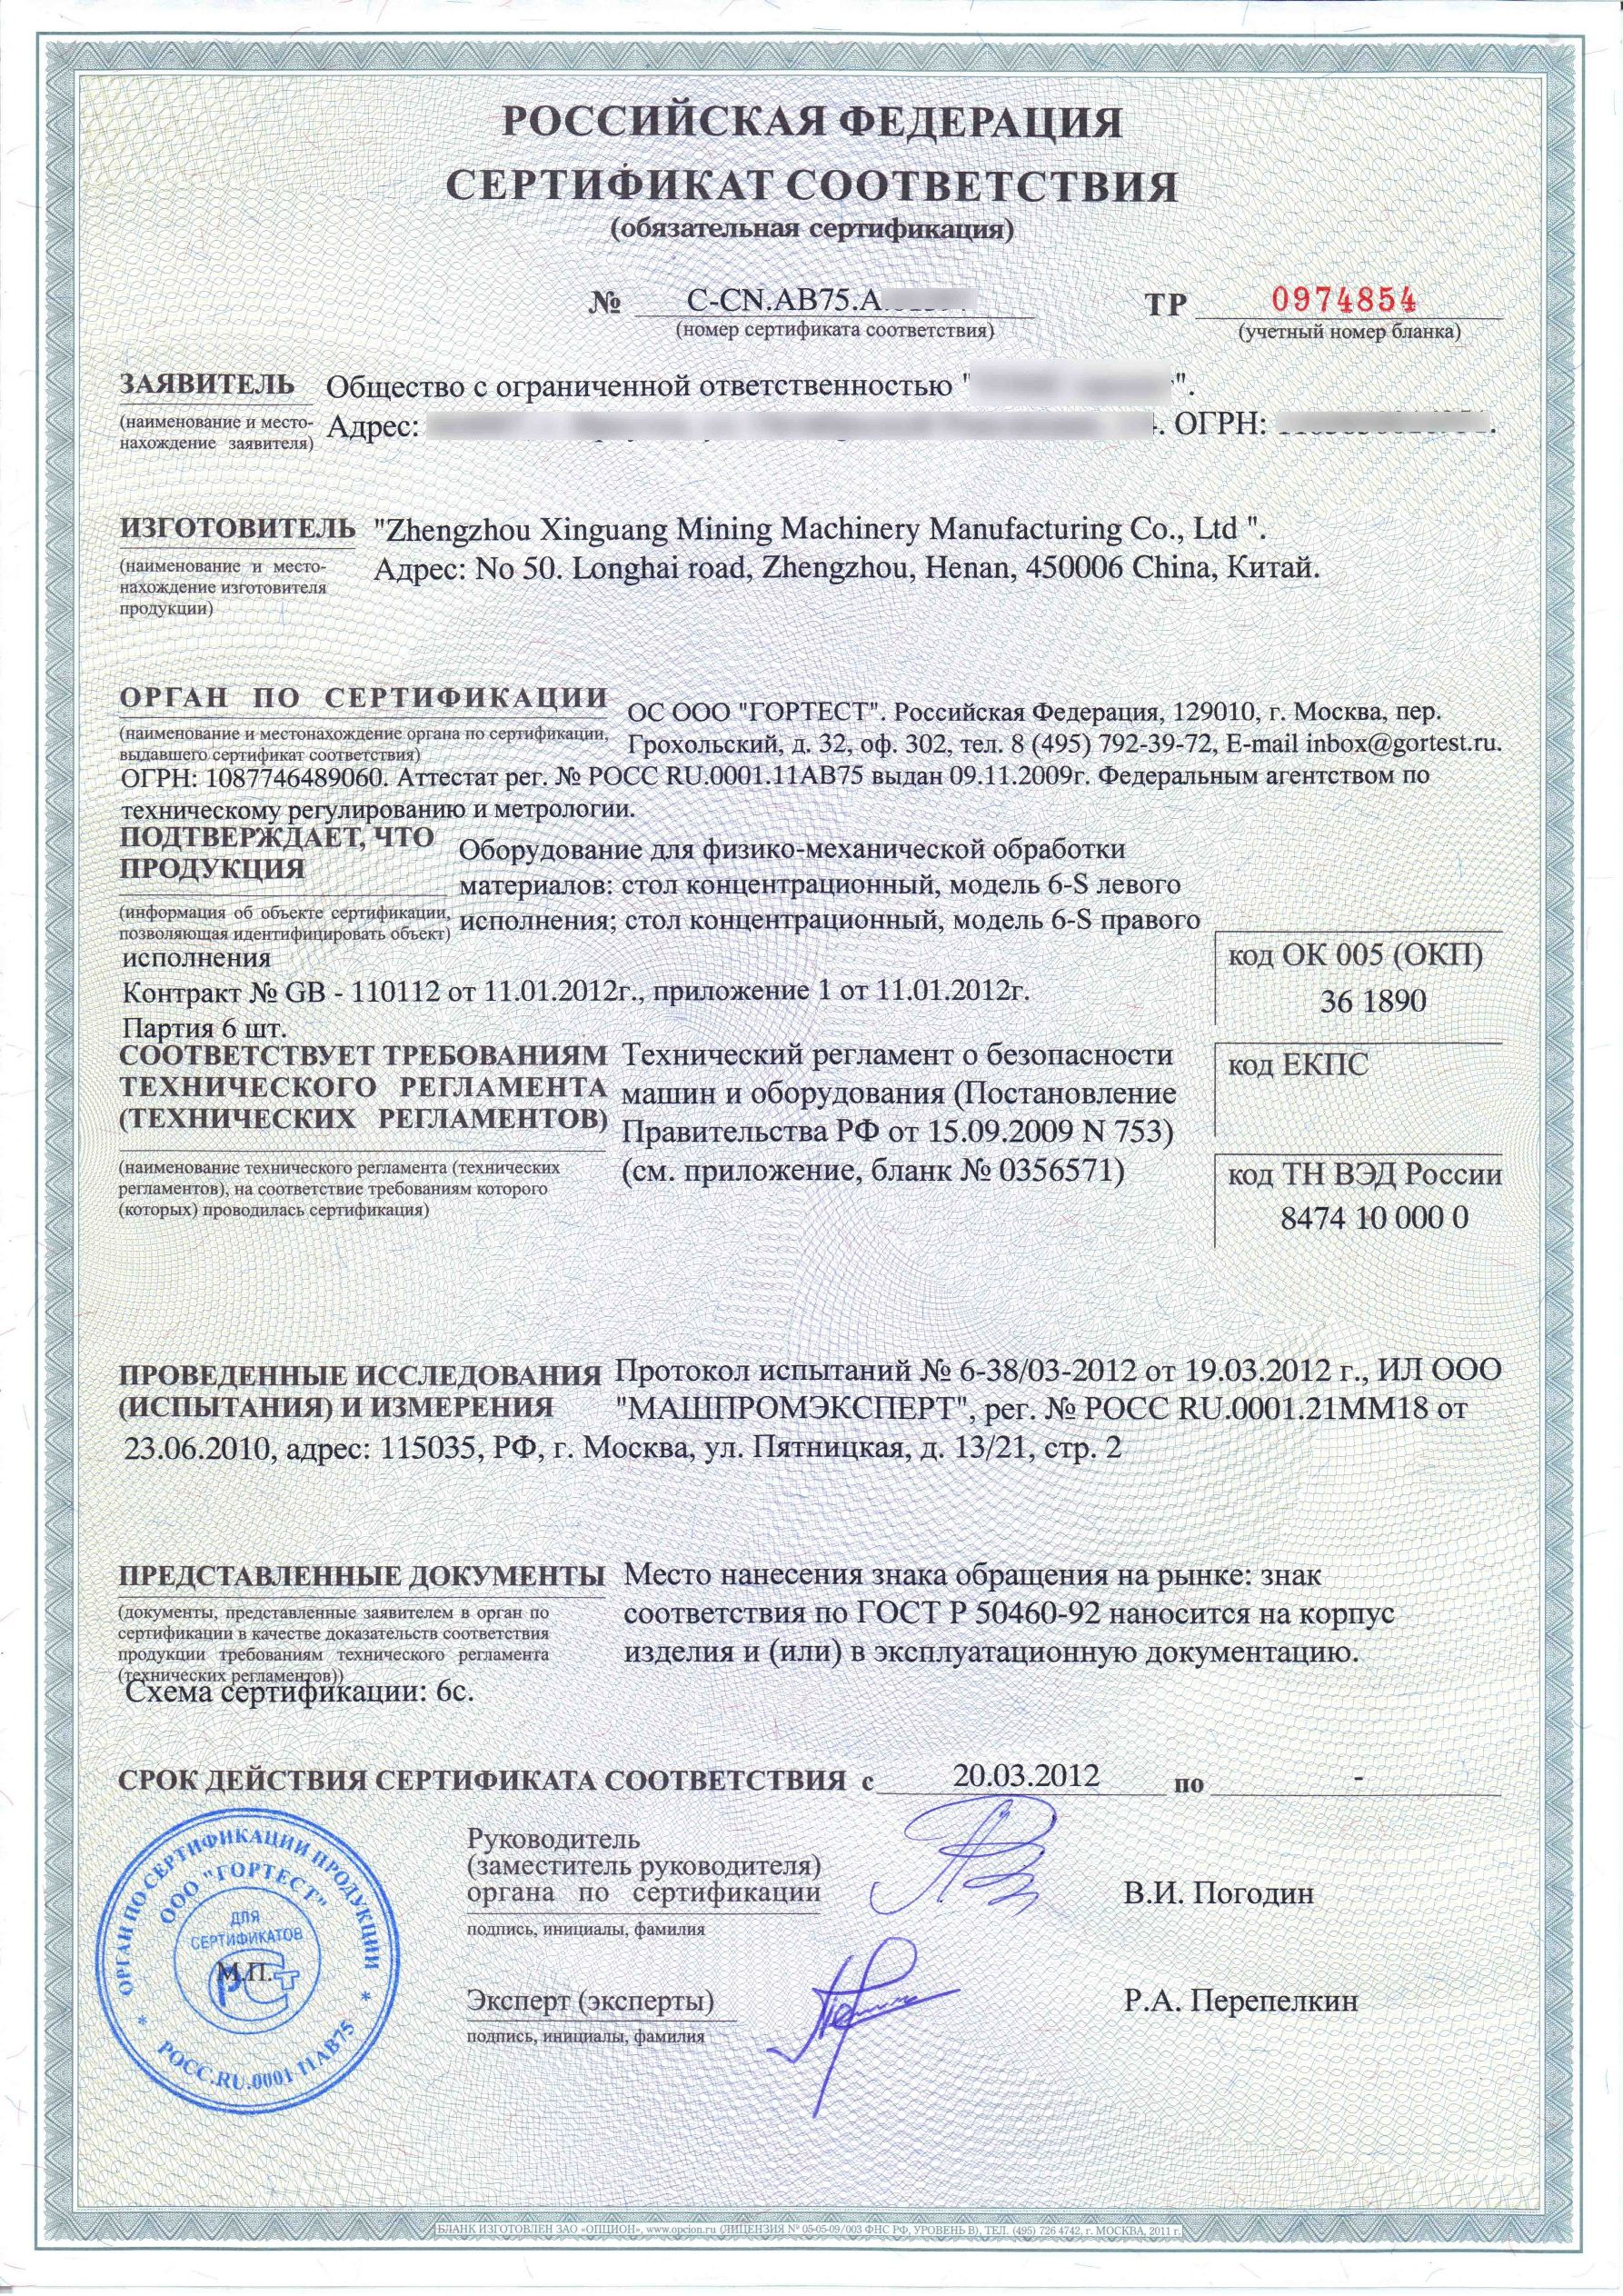 This type of certificate is gradually replacing GOST R Conformity Certificates for many products. Certificate of Conformity to Technical Regulations is mandatory for importing to Russia machinery, gas equipment, milk, cheese, oil, tyres, cycle, bike etc.